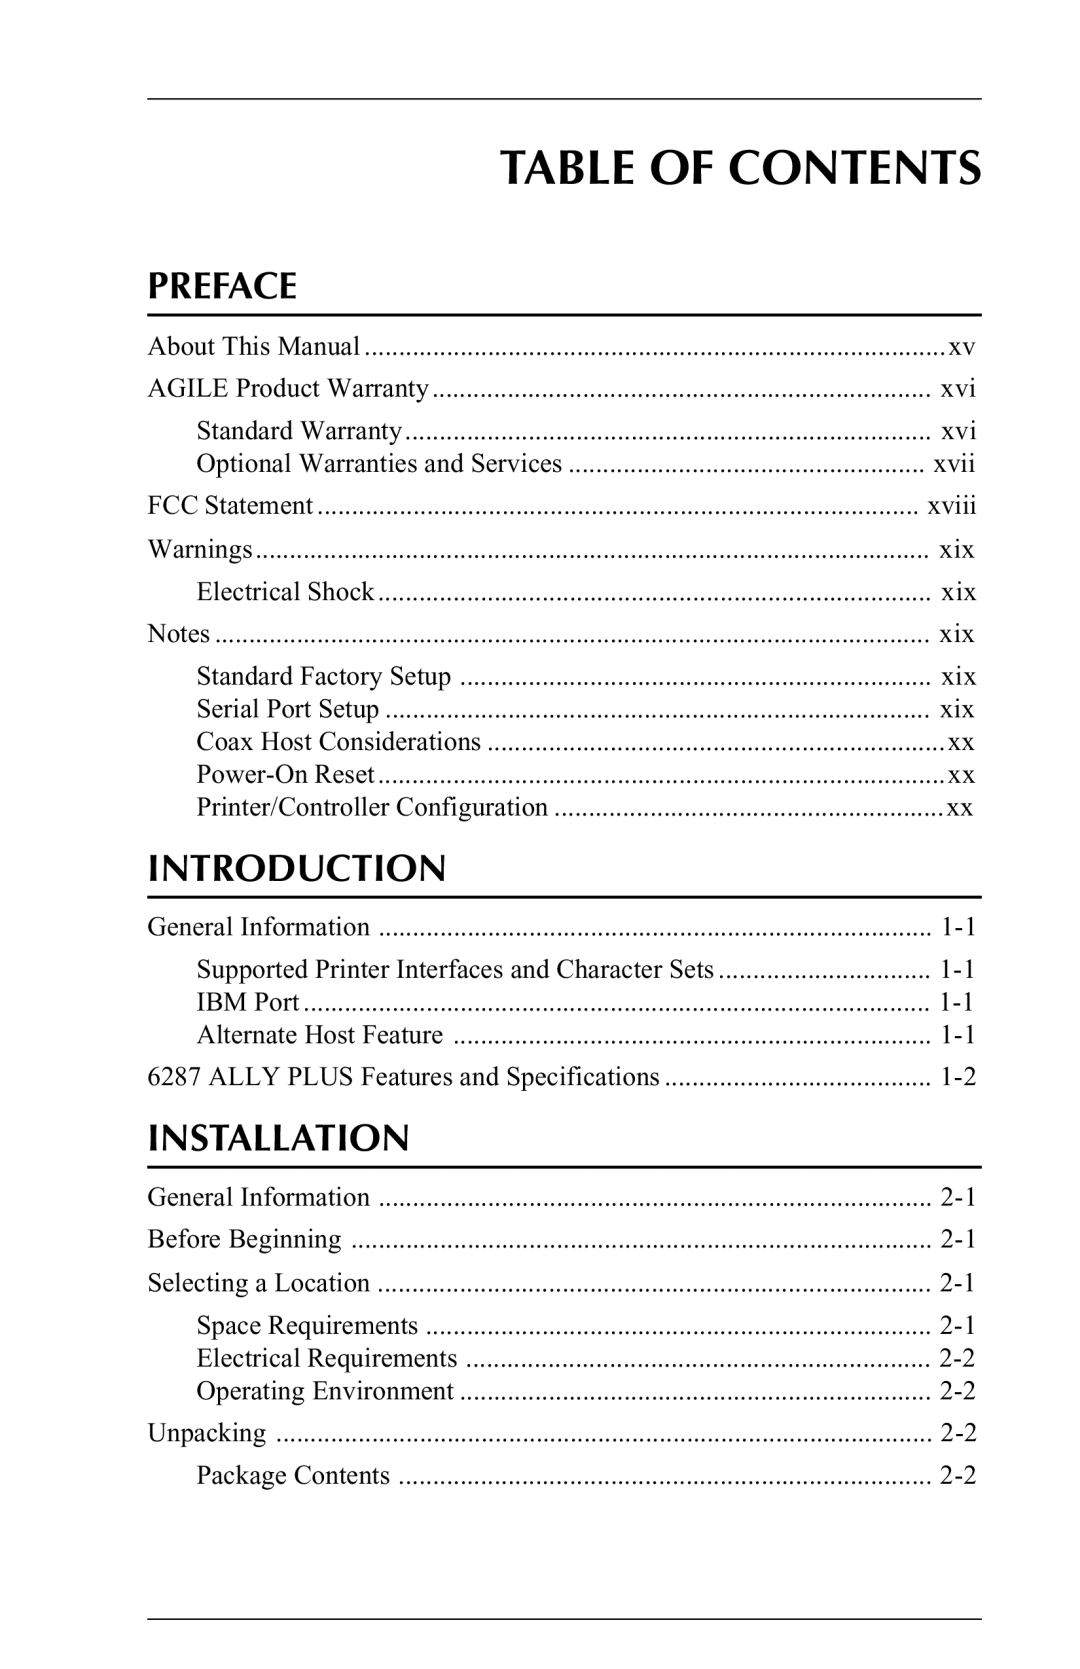 Xerox 6287 user manual Table of Contents 